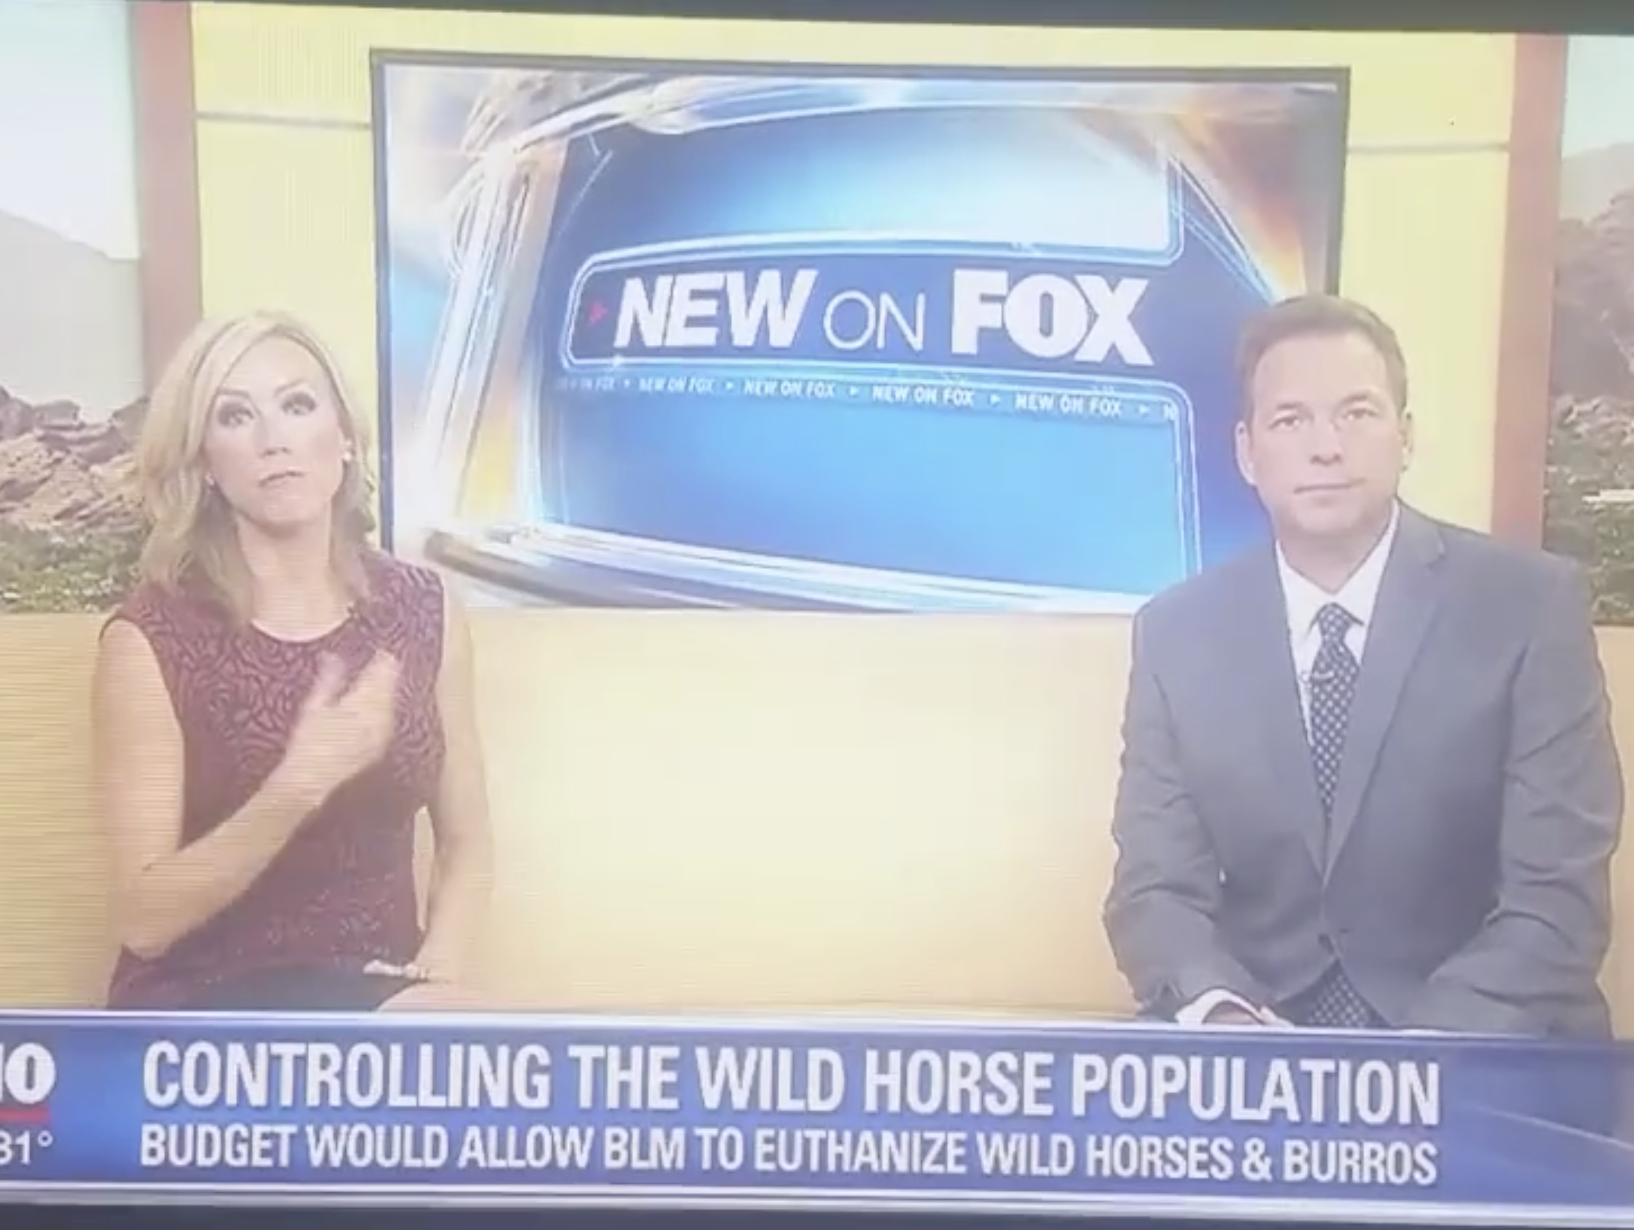 BREAKING NEWS:  President’s Budget proposes to murder wild horses.